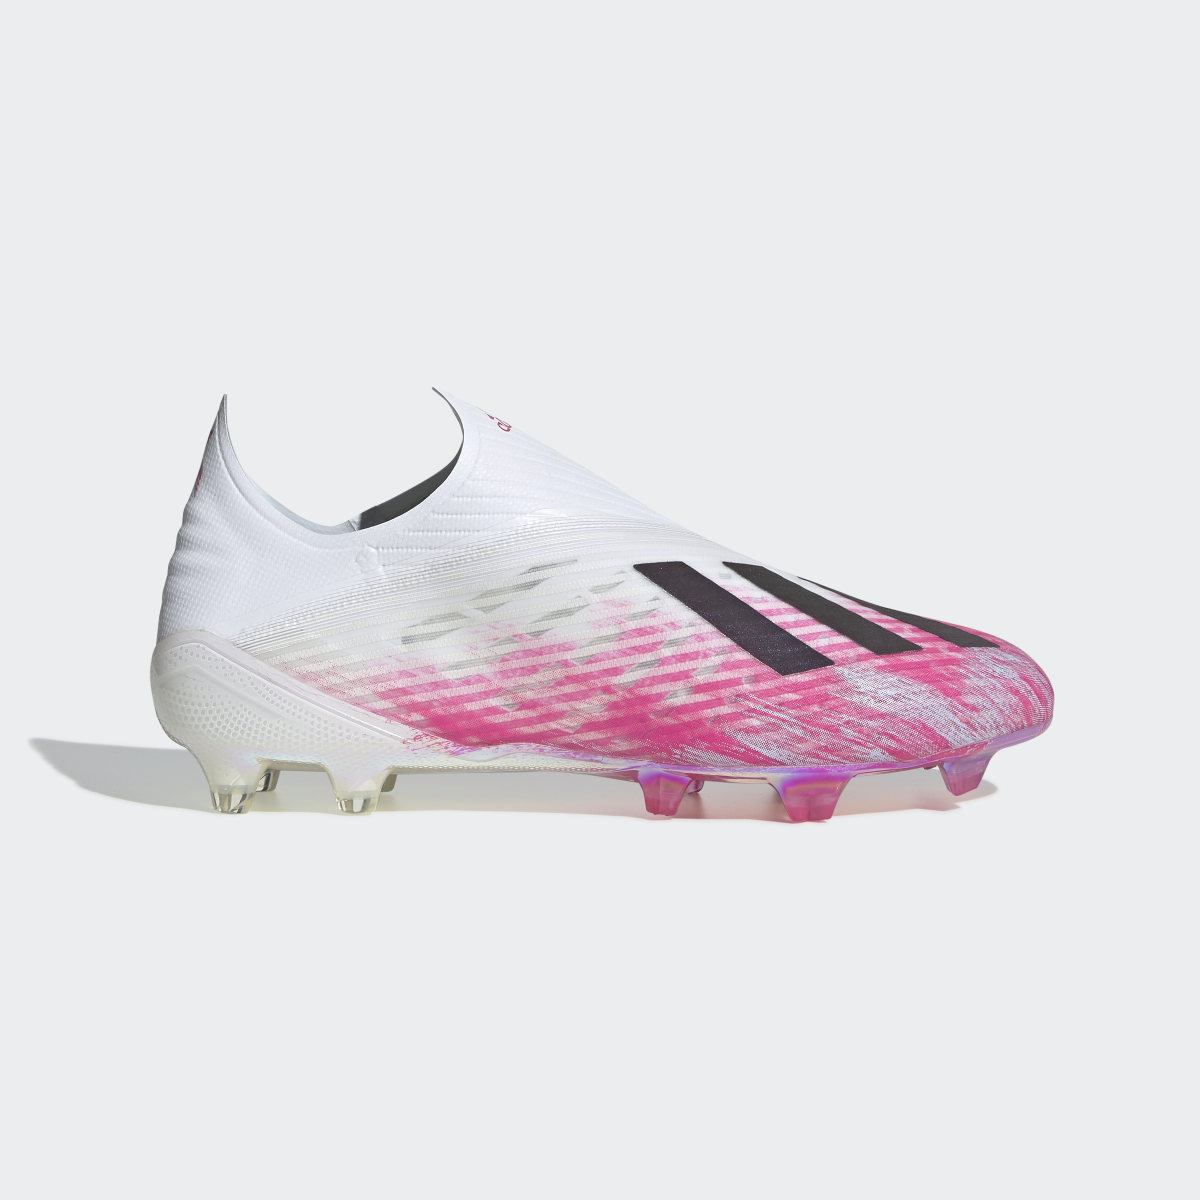 all pink adidas cleats